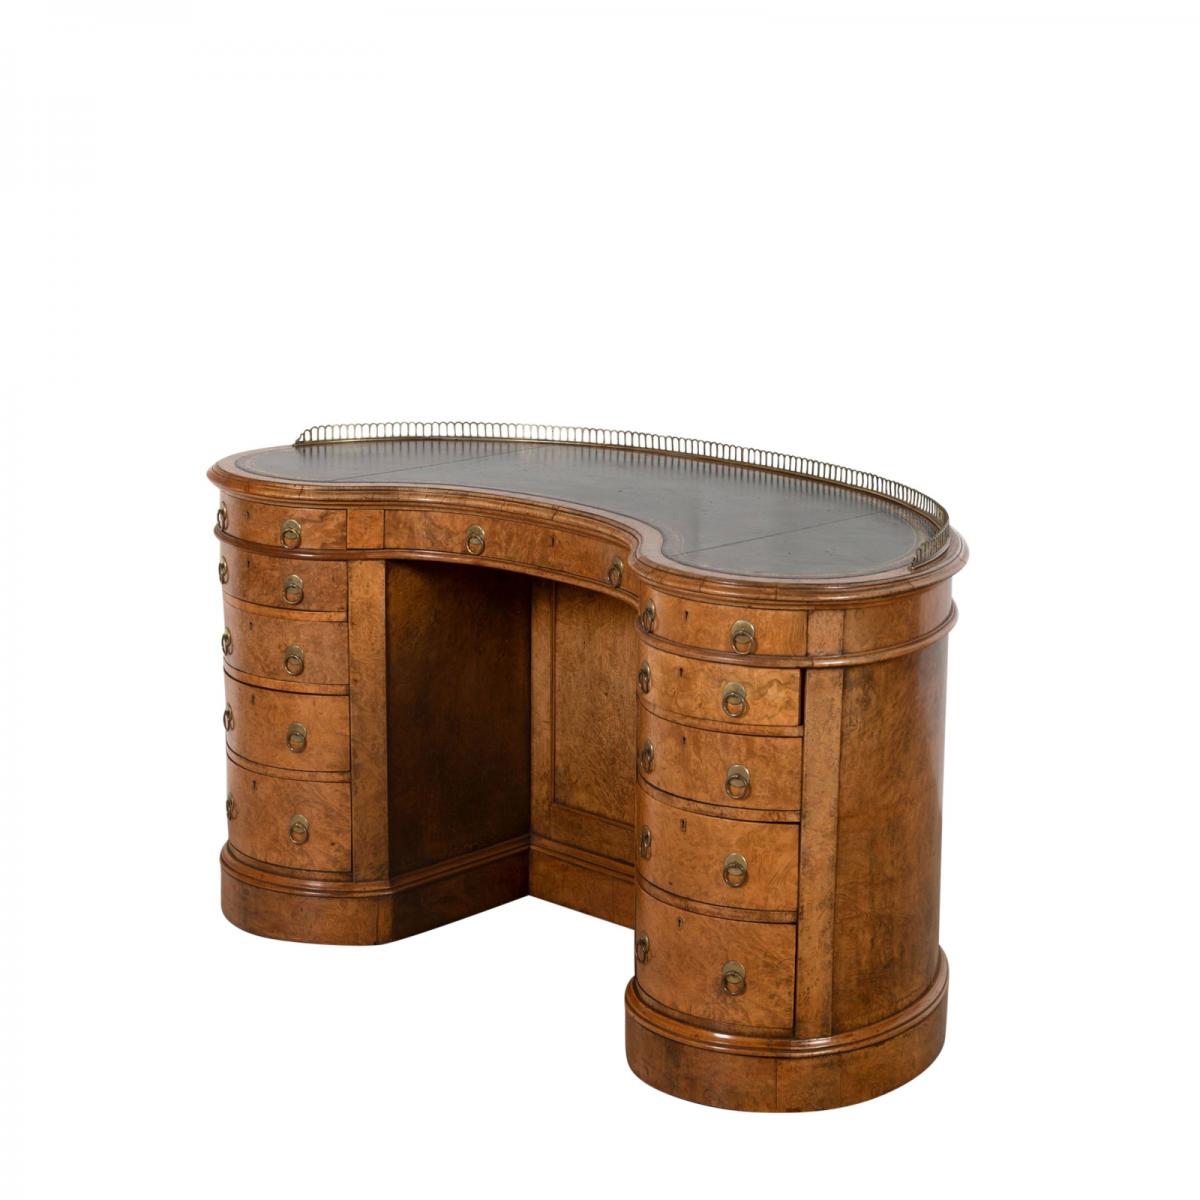 Gillows style kidney shaped desk